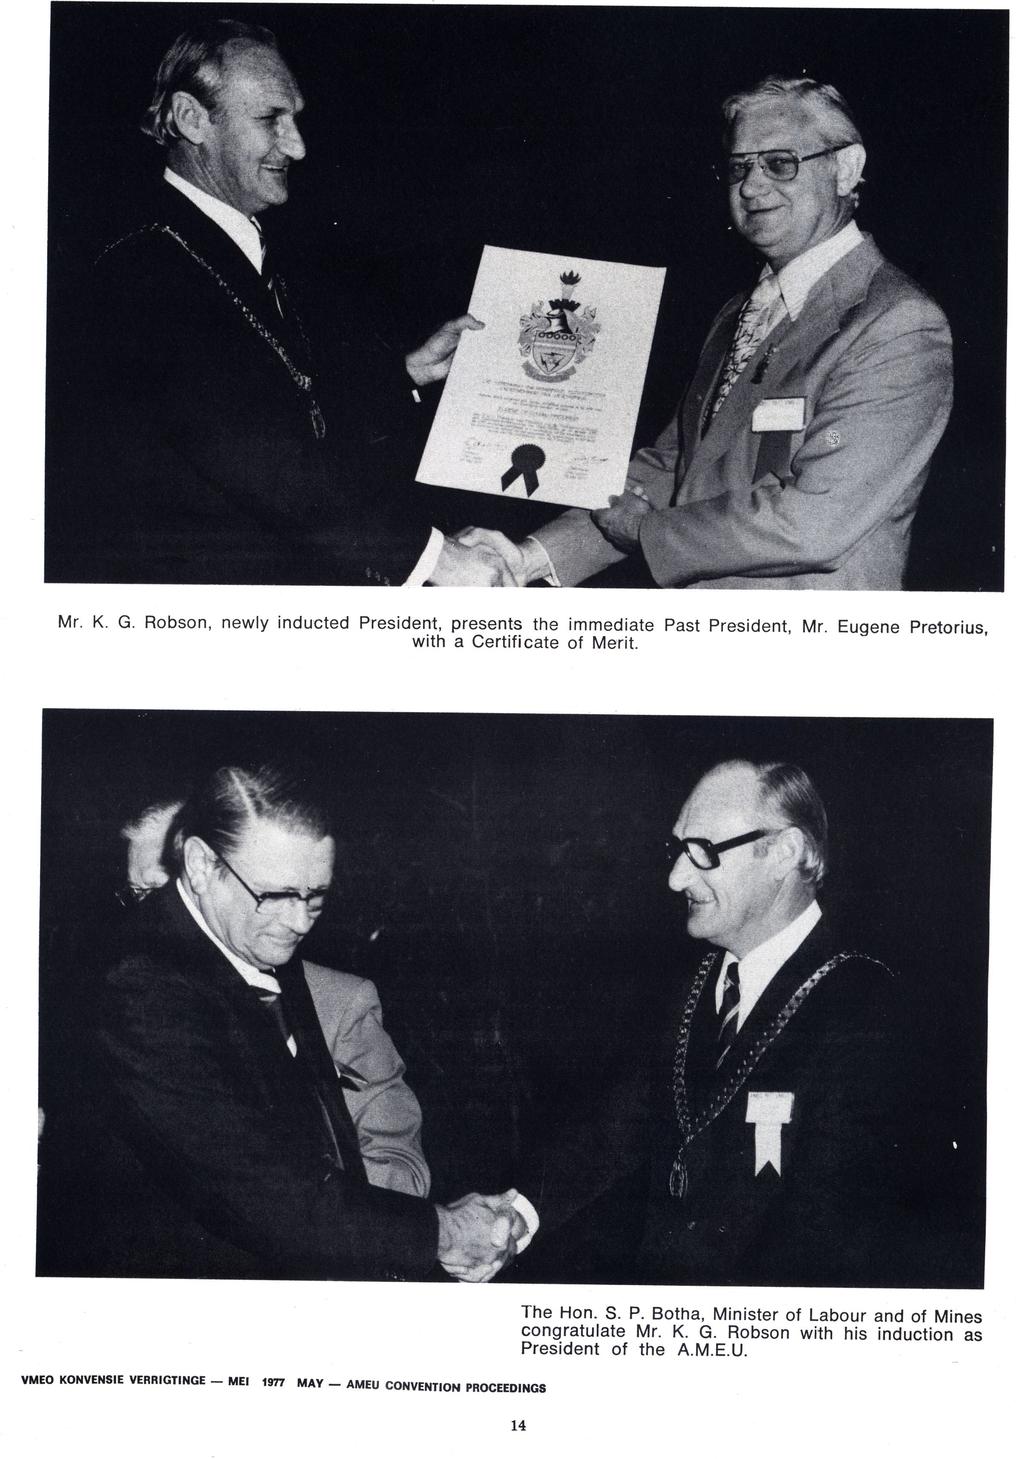 ^%. V % Mr. K. G. Robson, newly inducted President, presents the immediate Past President, Mr. Eugene Pretorius, with a Certificate of Merit. The Hon. S. P. Botha, Minister of Labour and of Mines congratulate Mr.